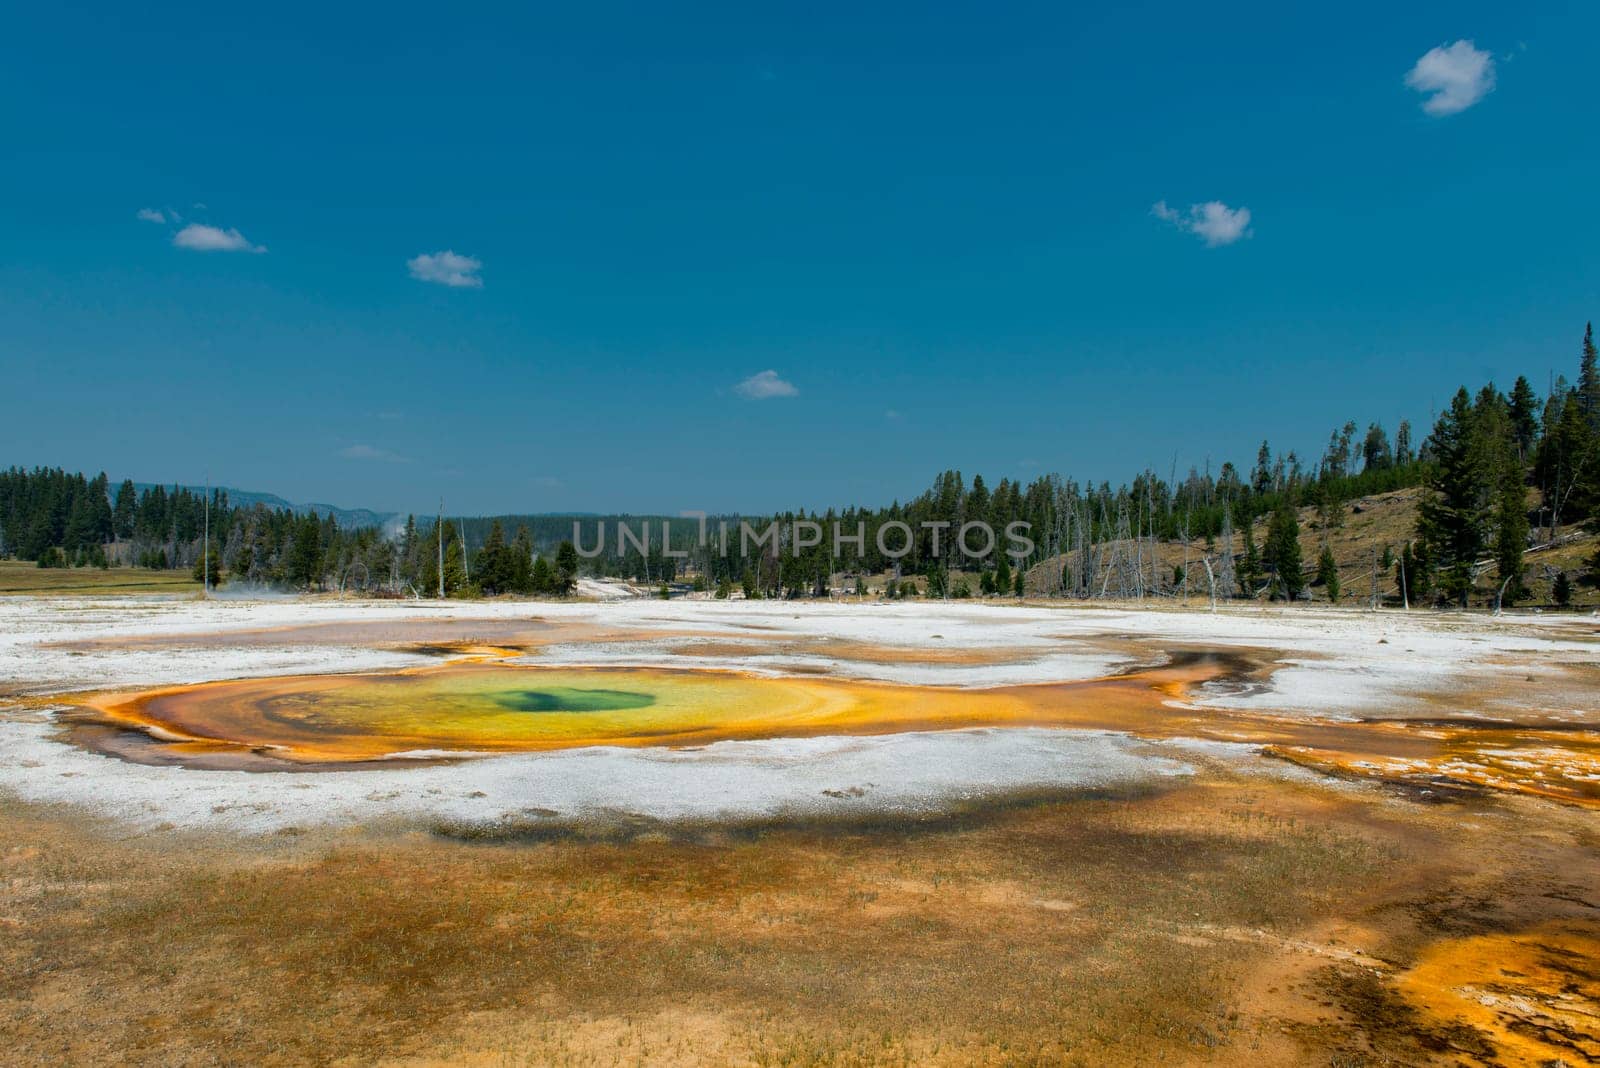 yellowstone hot springs natural background texture with superb colors